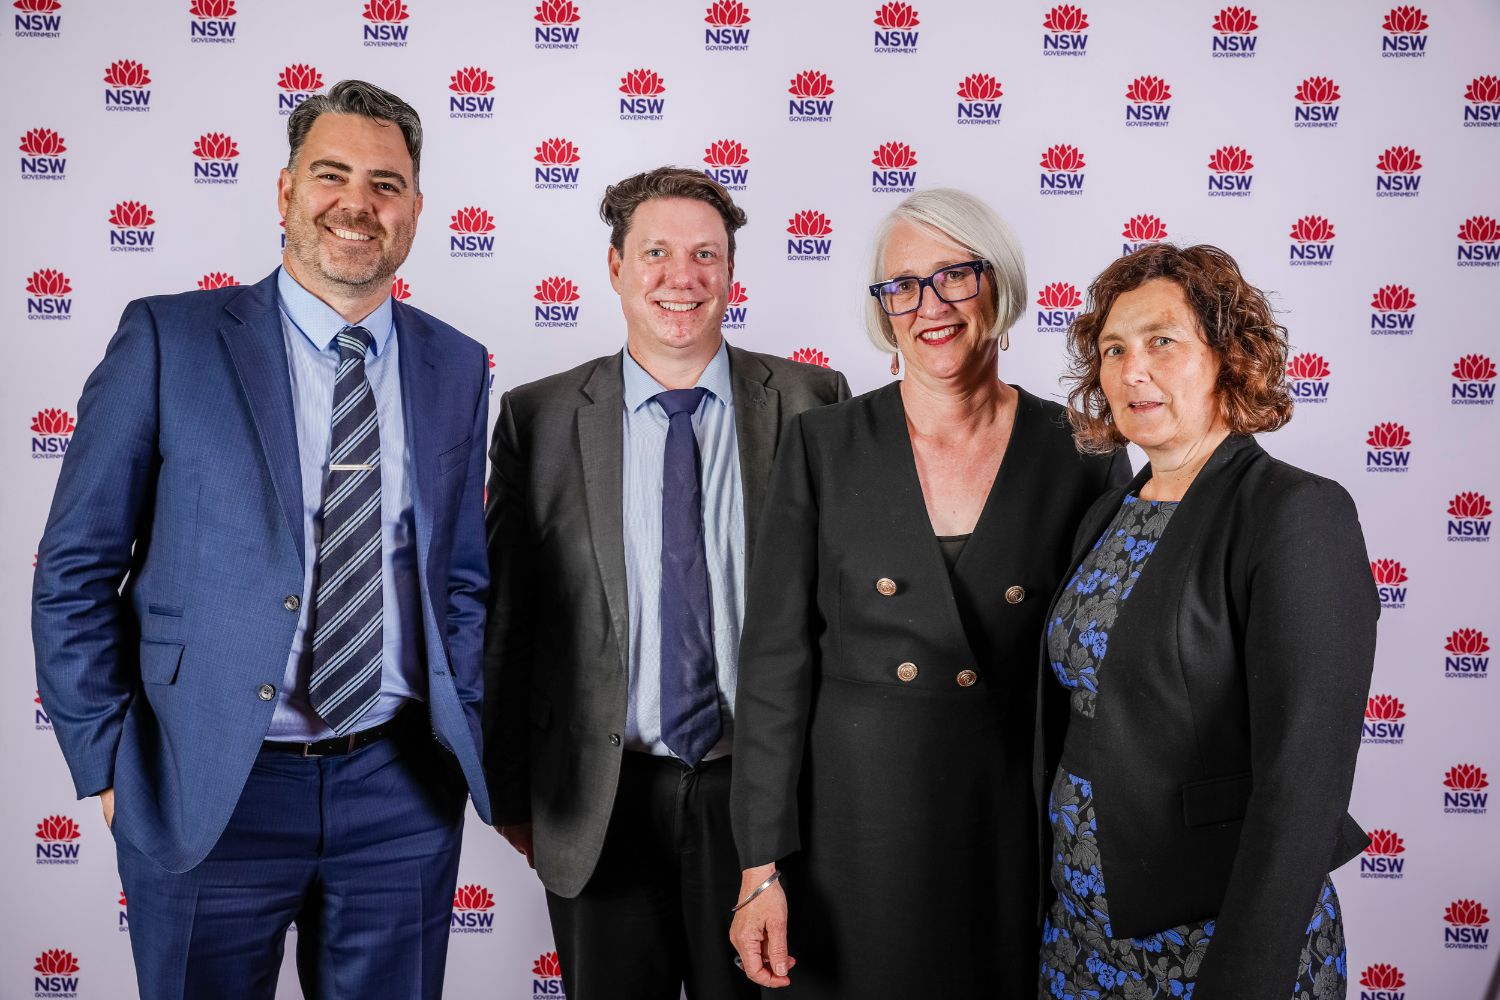 2019 NSW Health Awards image gallery